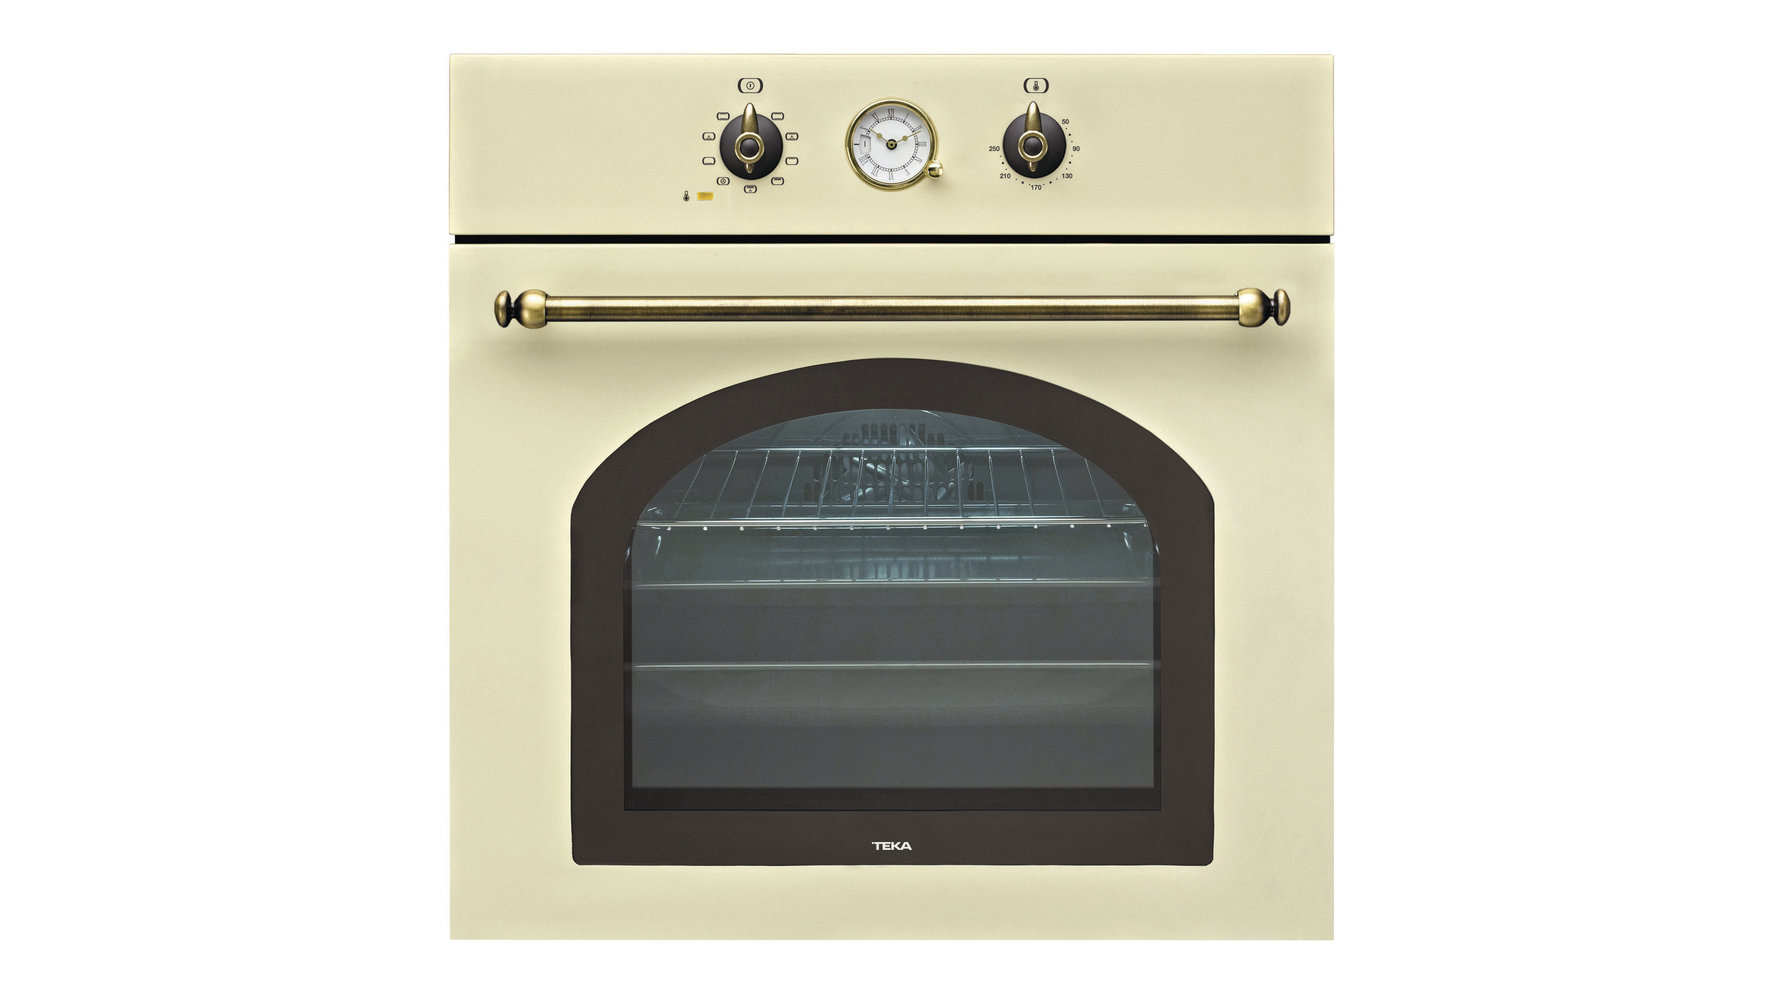 Multifunction SurroundTemp oven in 60 cm